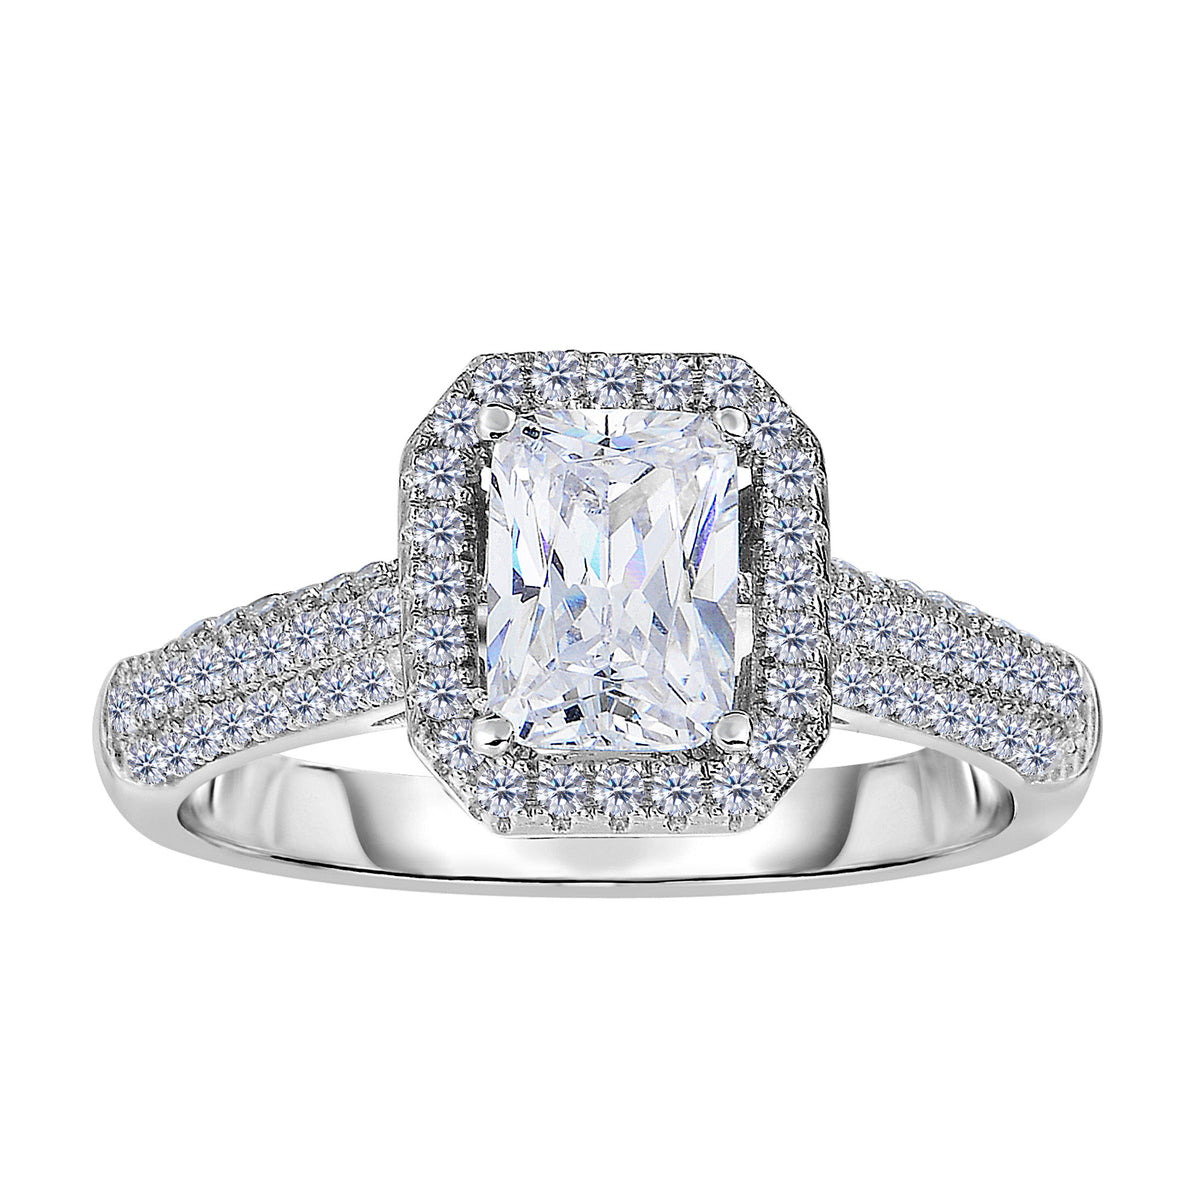 Sterling Silver With Rhodium Finish With Radiant Center And Pave' Set Side Cz Stones Engagement Style Ring - JewelryAffairs
 - 1